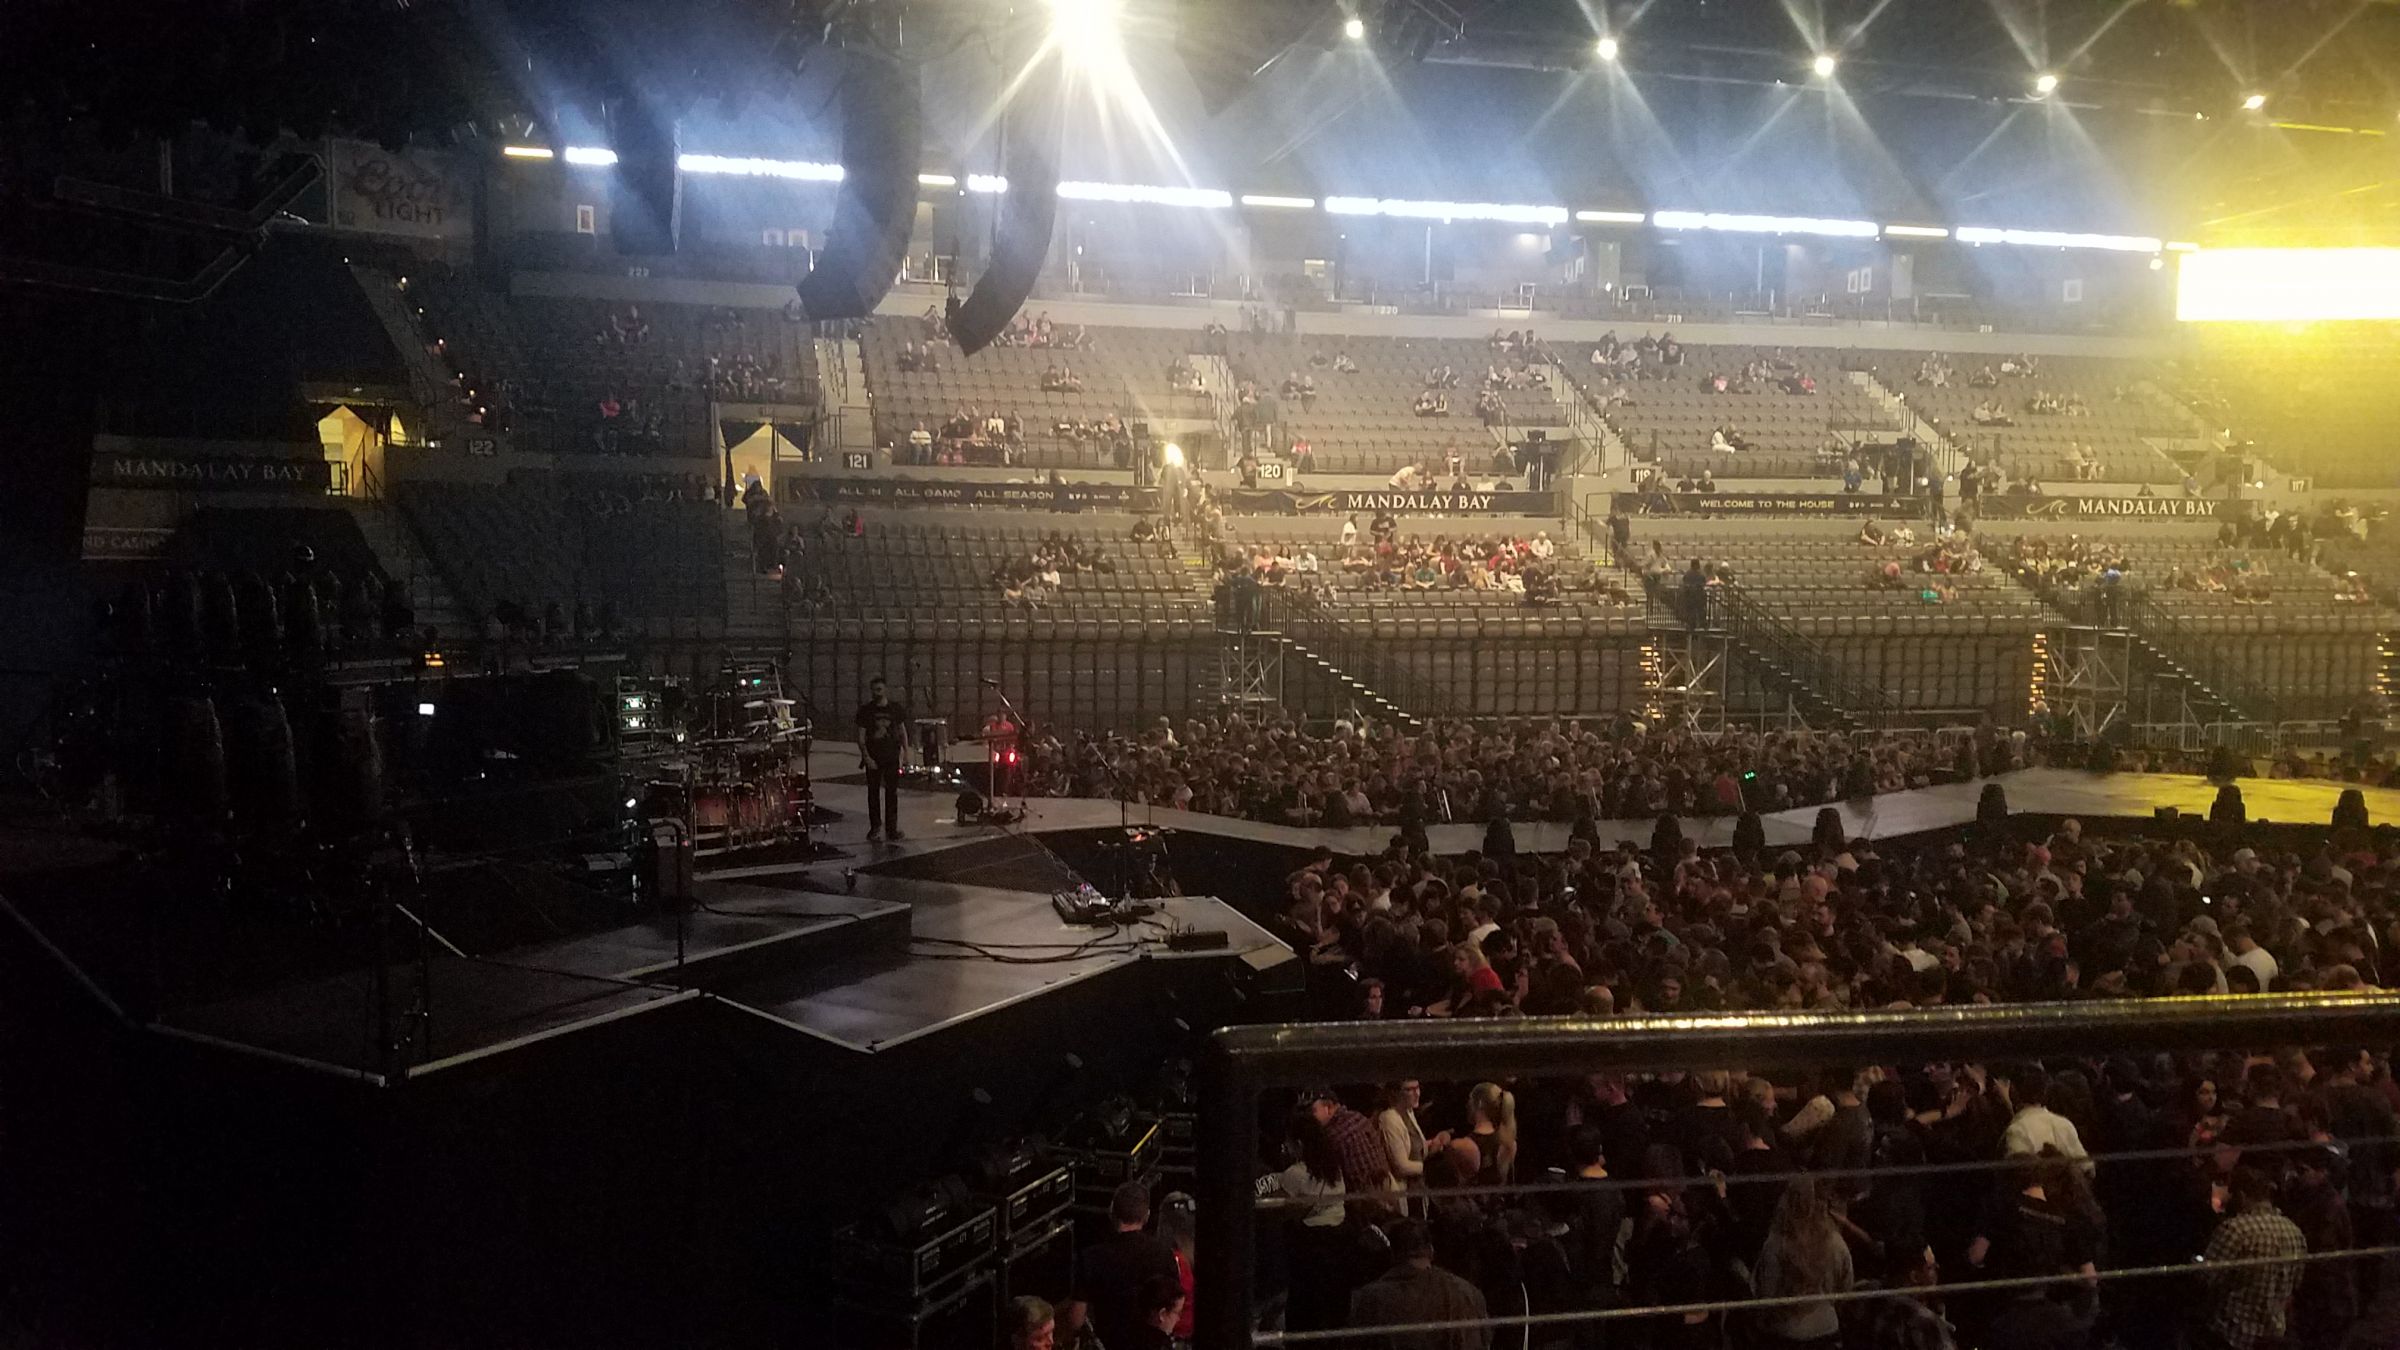 section 104, row m seat view  for concert - michelob ultra arena